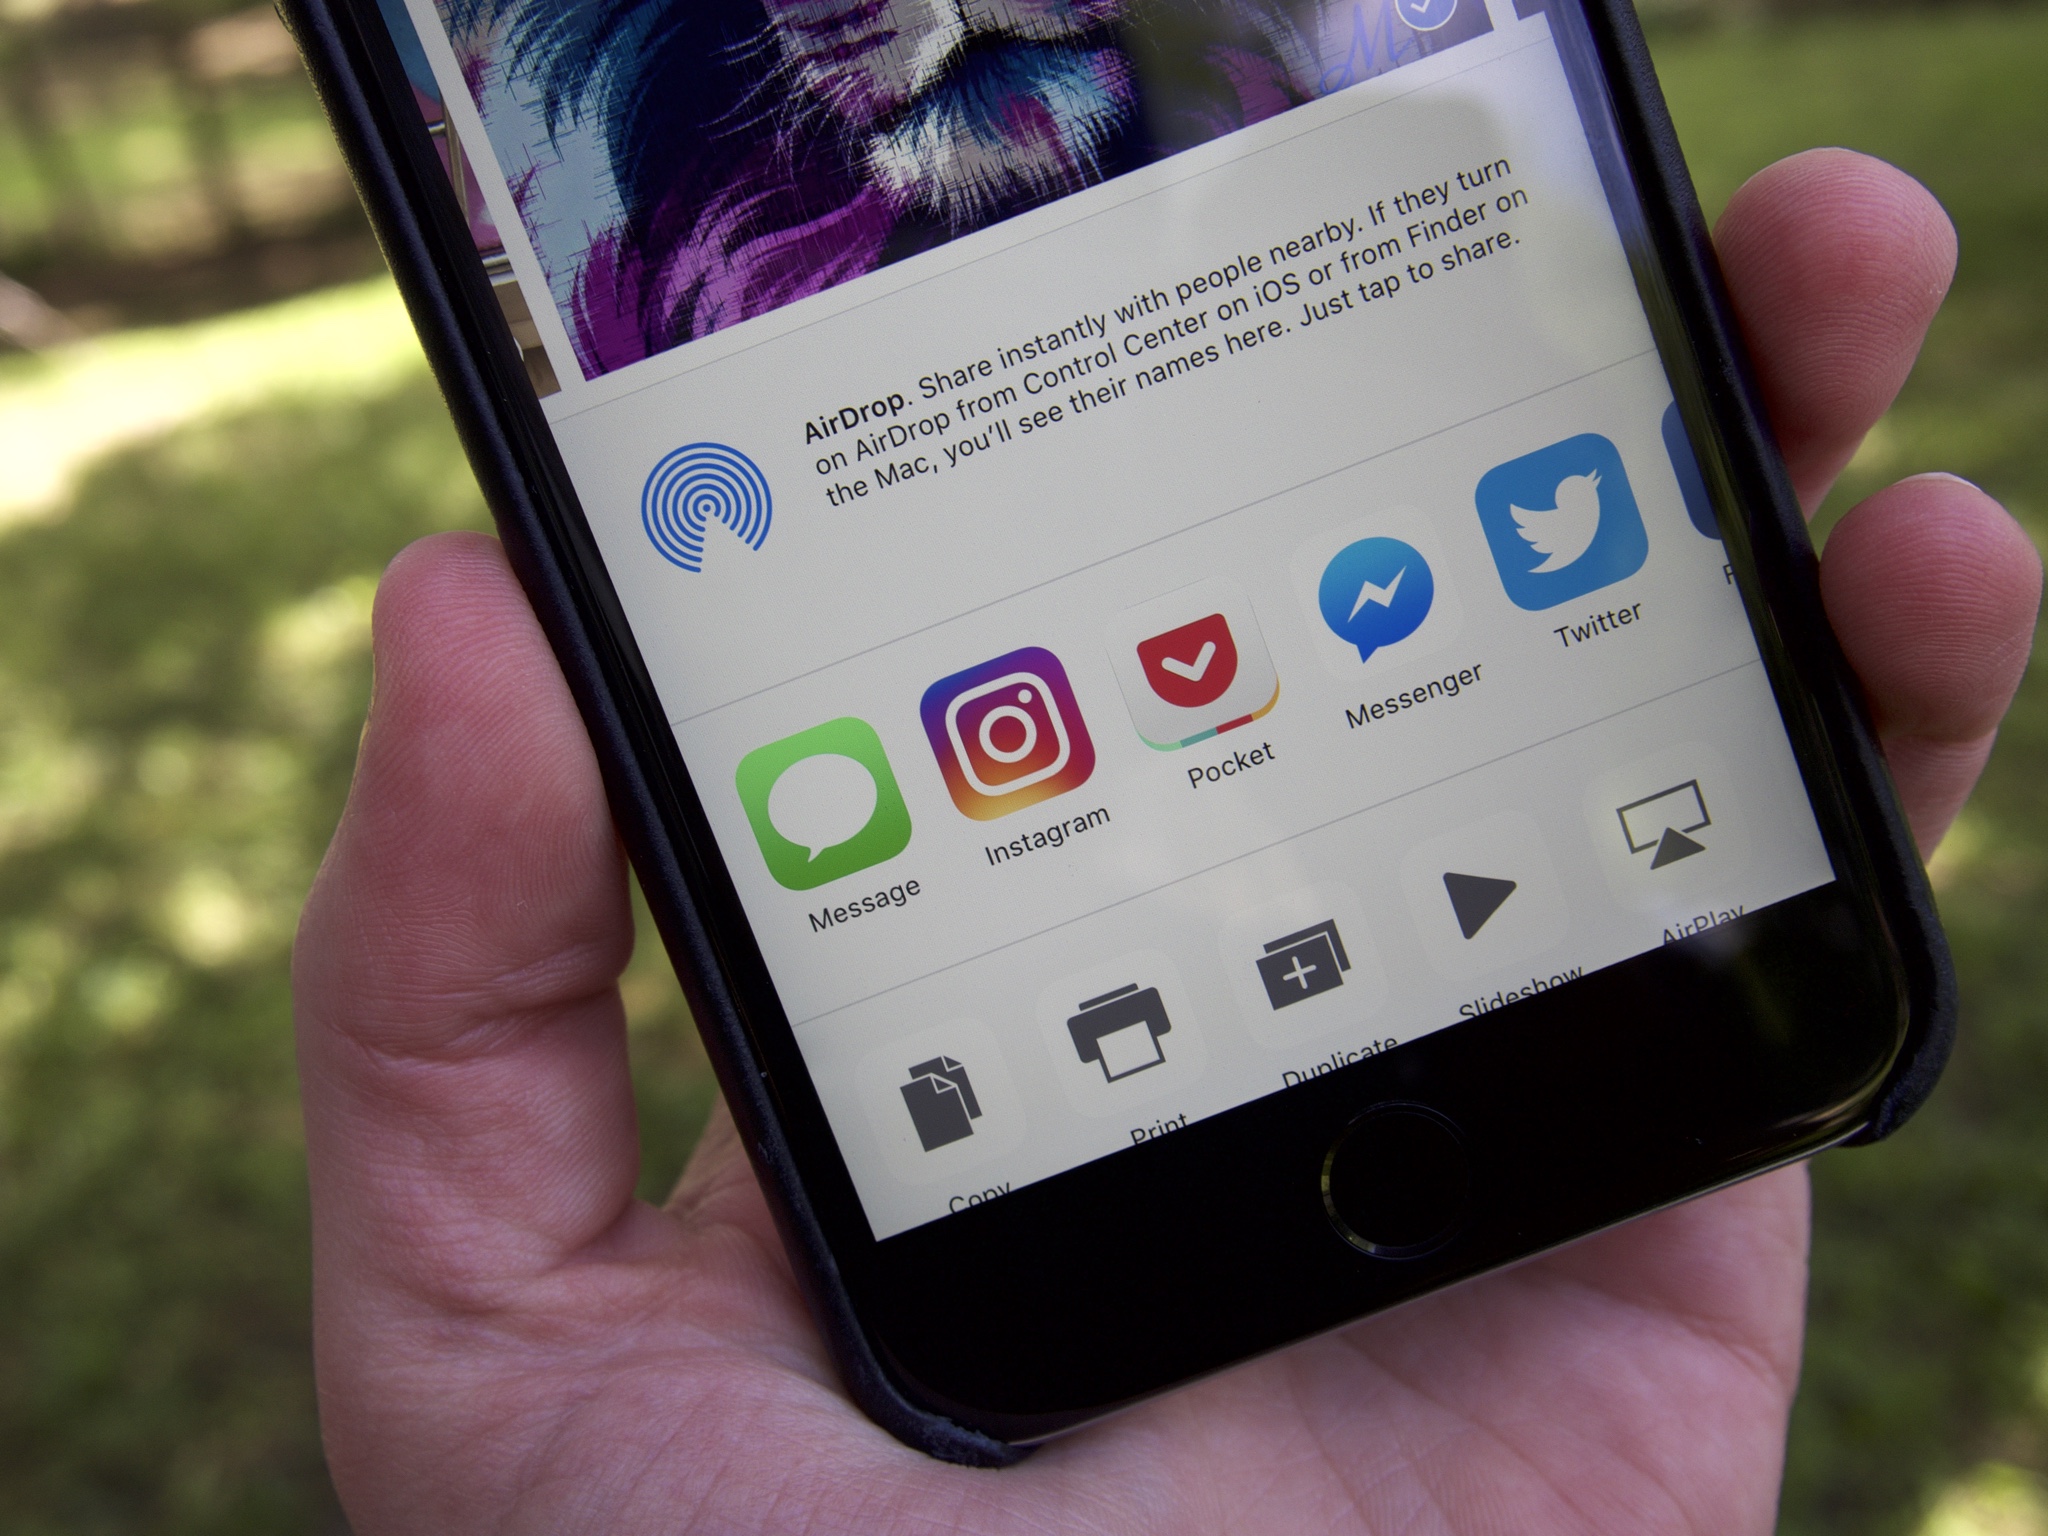 Instagram users can now share photos to the service from any other app